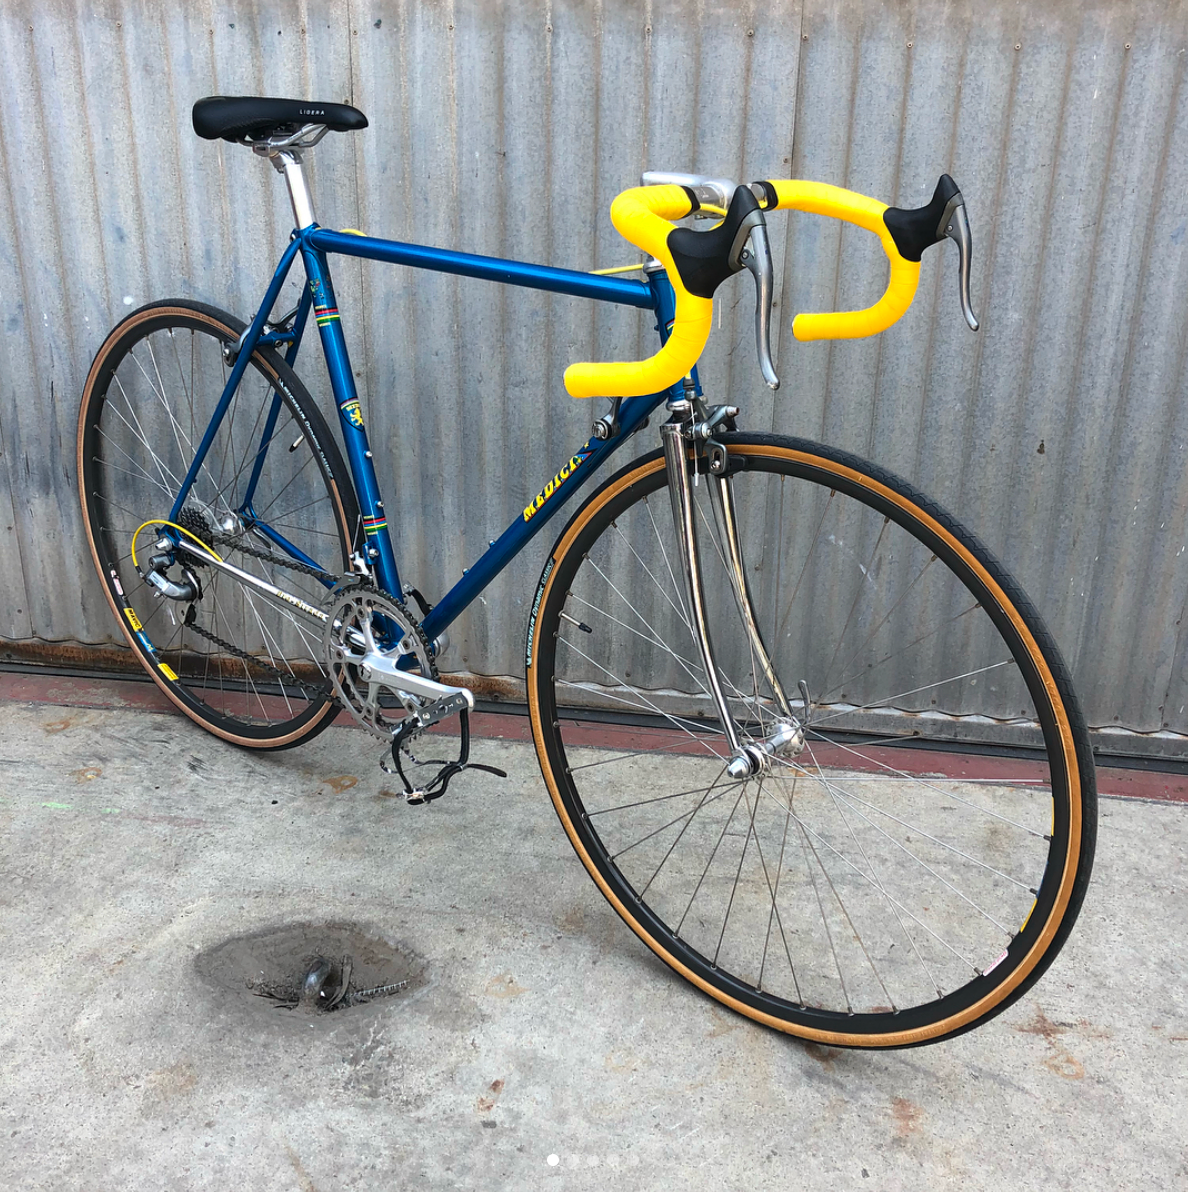 Medici - Classic L'Eroica Road Bike in 55 CM - Built with Shimano 600 Tri-Color Components